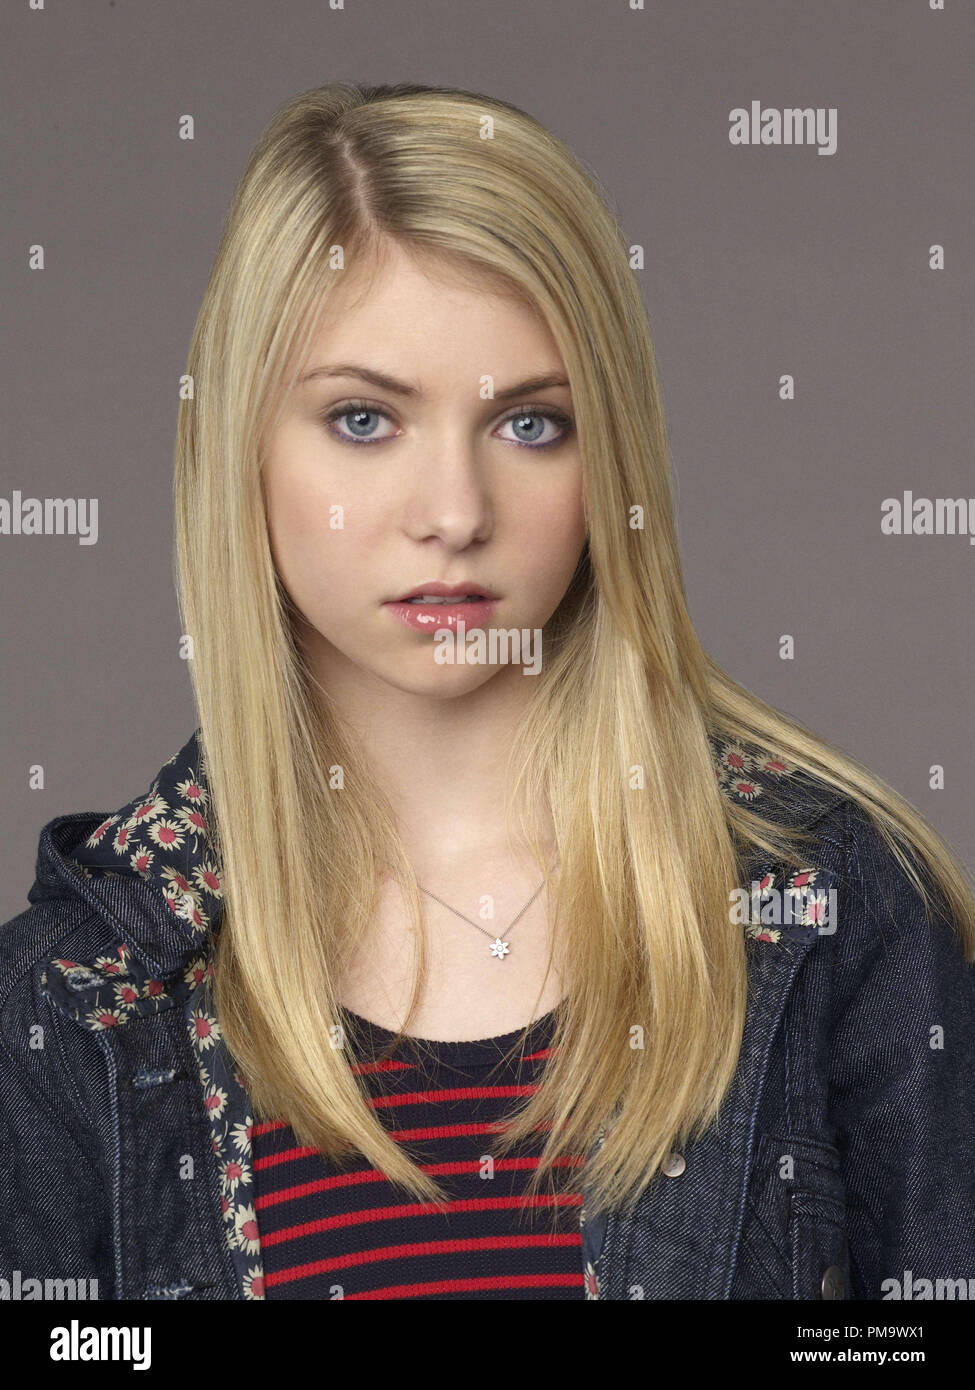 Gossip Girl Pictured: Taylor Momsen as Jenny Humphrey © 2007 The